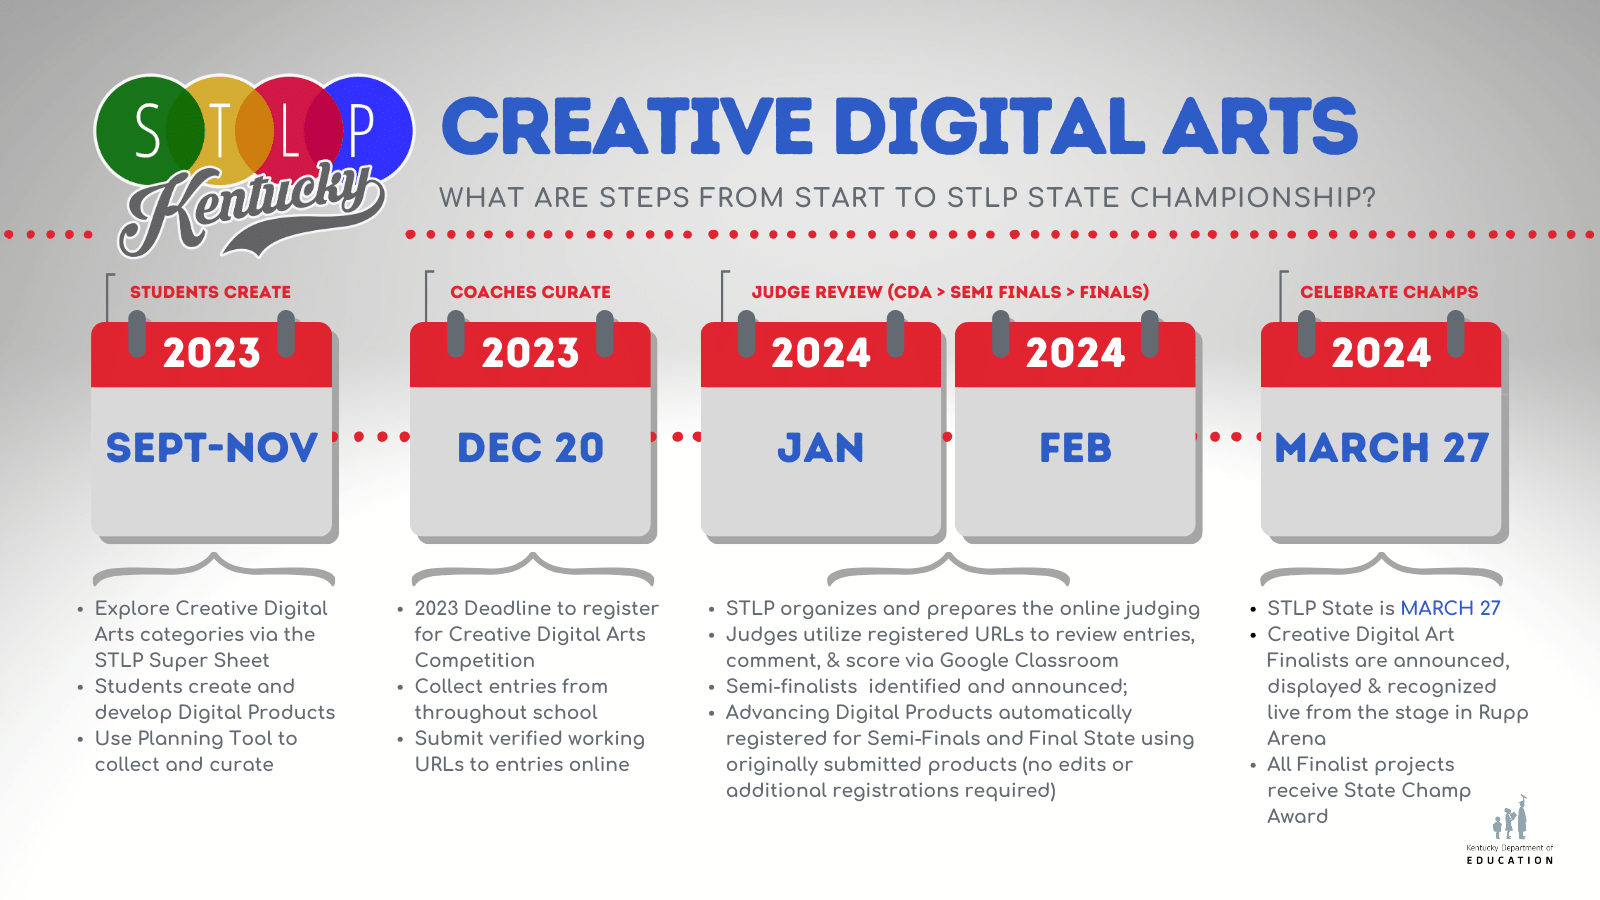 Creative Digital Arts competition timeline for 2023-2024 indicates the important milestones for the participating in the competition